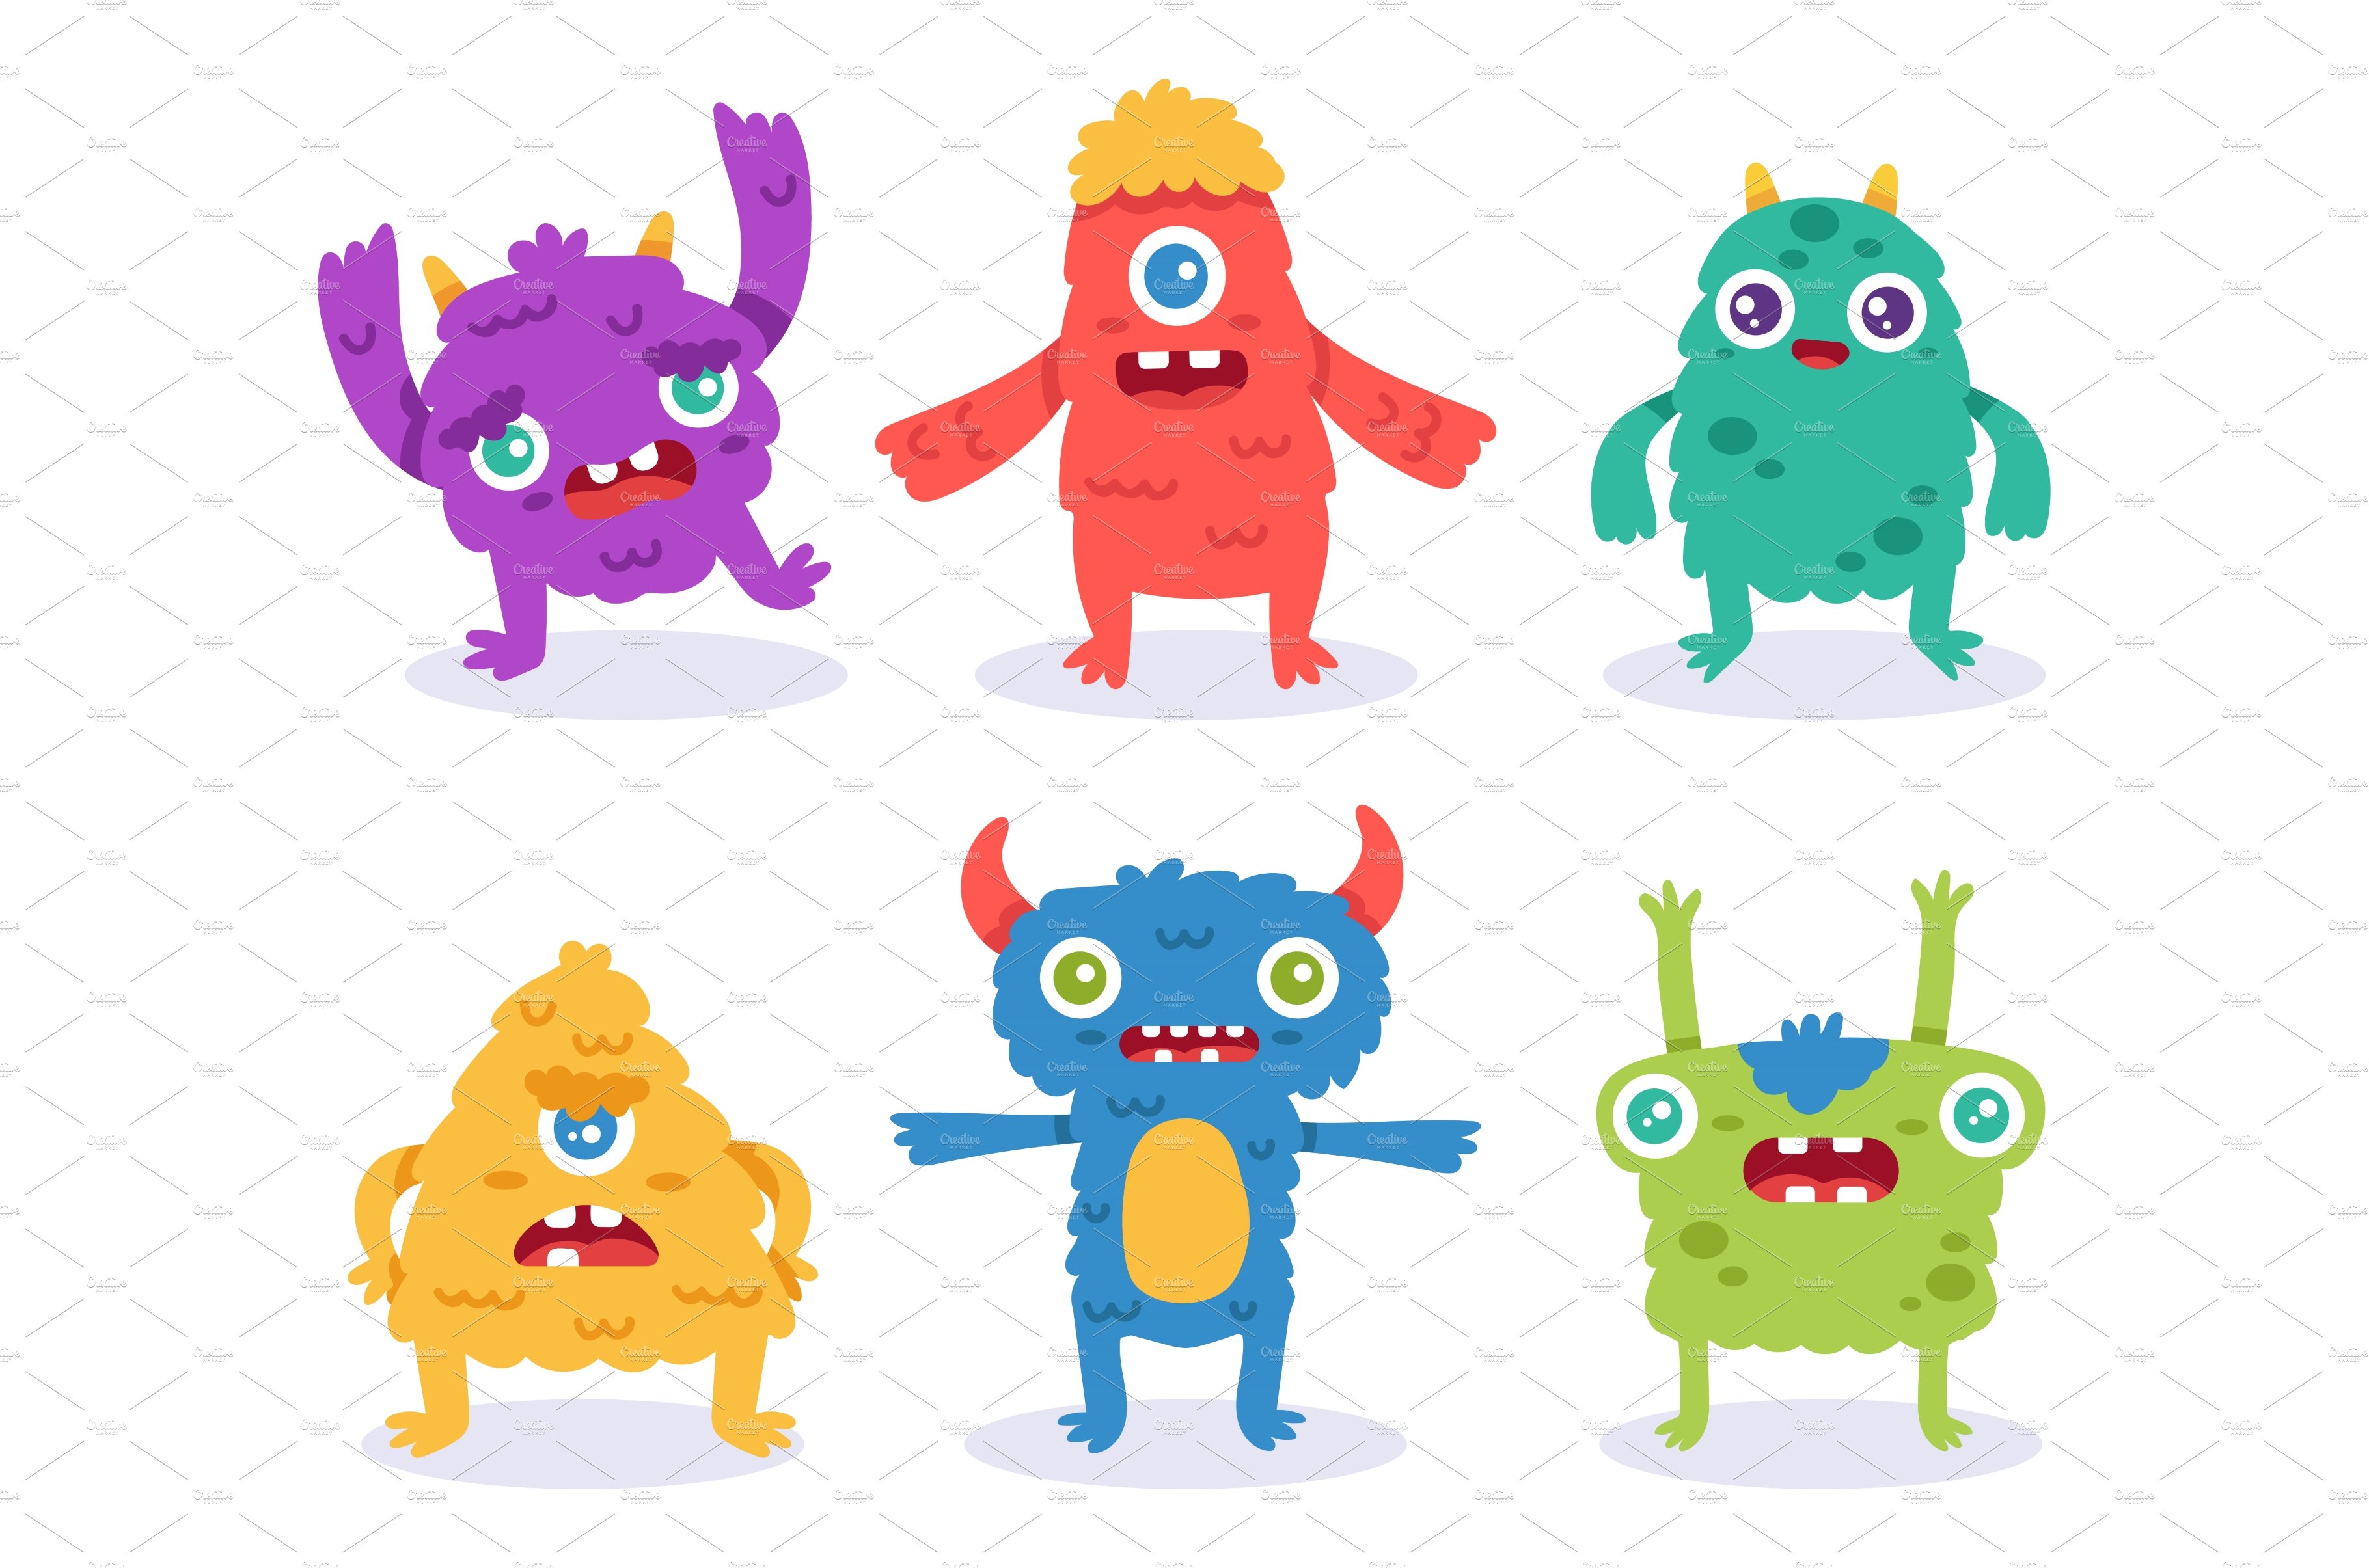 Cartoon monster characters. Colorful cover image.